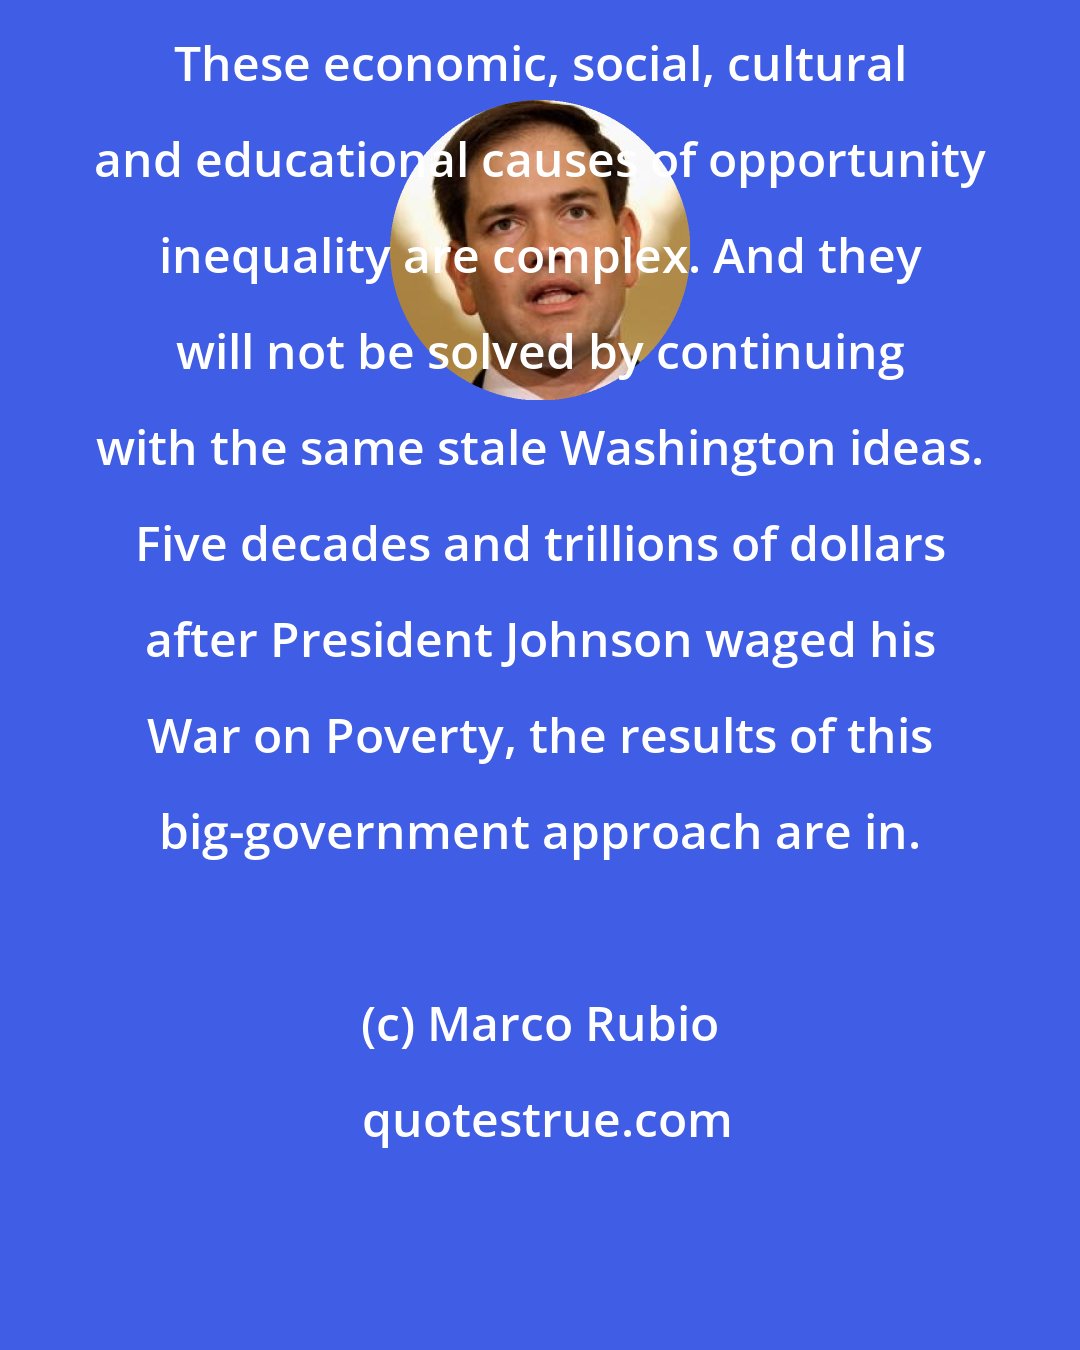 Marco Rubio: These economic, social, cultural and educational causes of opportunity inequality are complex. And they will not be solved by continuing with the same stale Washington ideas. Five decades and trillions of dollars after President Johnson waged his War on Poverty, the results of this big-government approach are in.